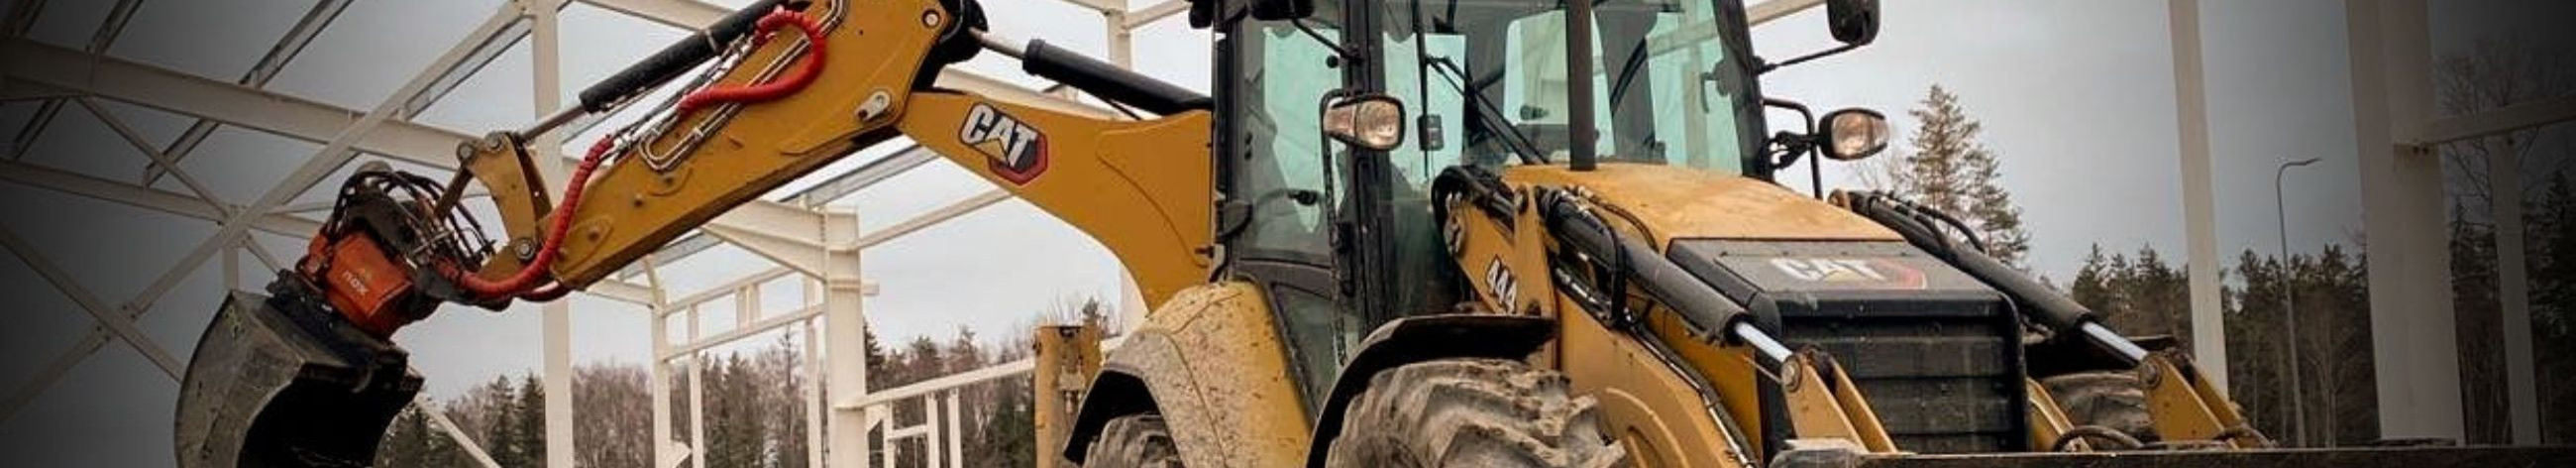 charging, Snow pushing, plates, parking lots, roads, excavation and soil work, landscaping, trails, cables, ditches, excavator services, excavation services Harju, parking lot construction, construction site preparation, landscaping and soil work